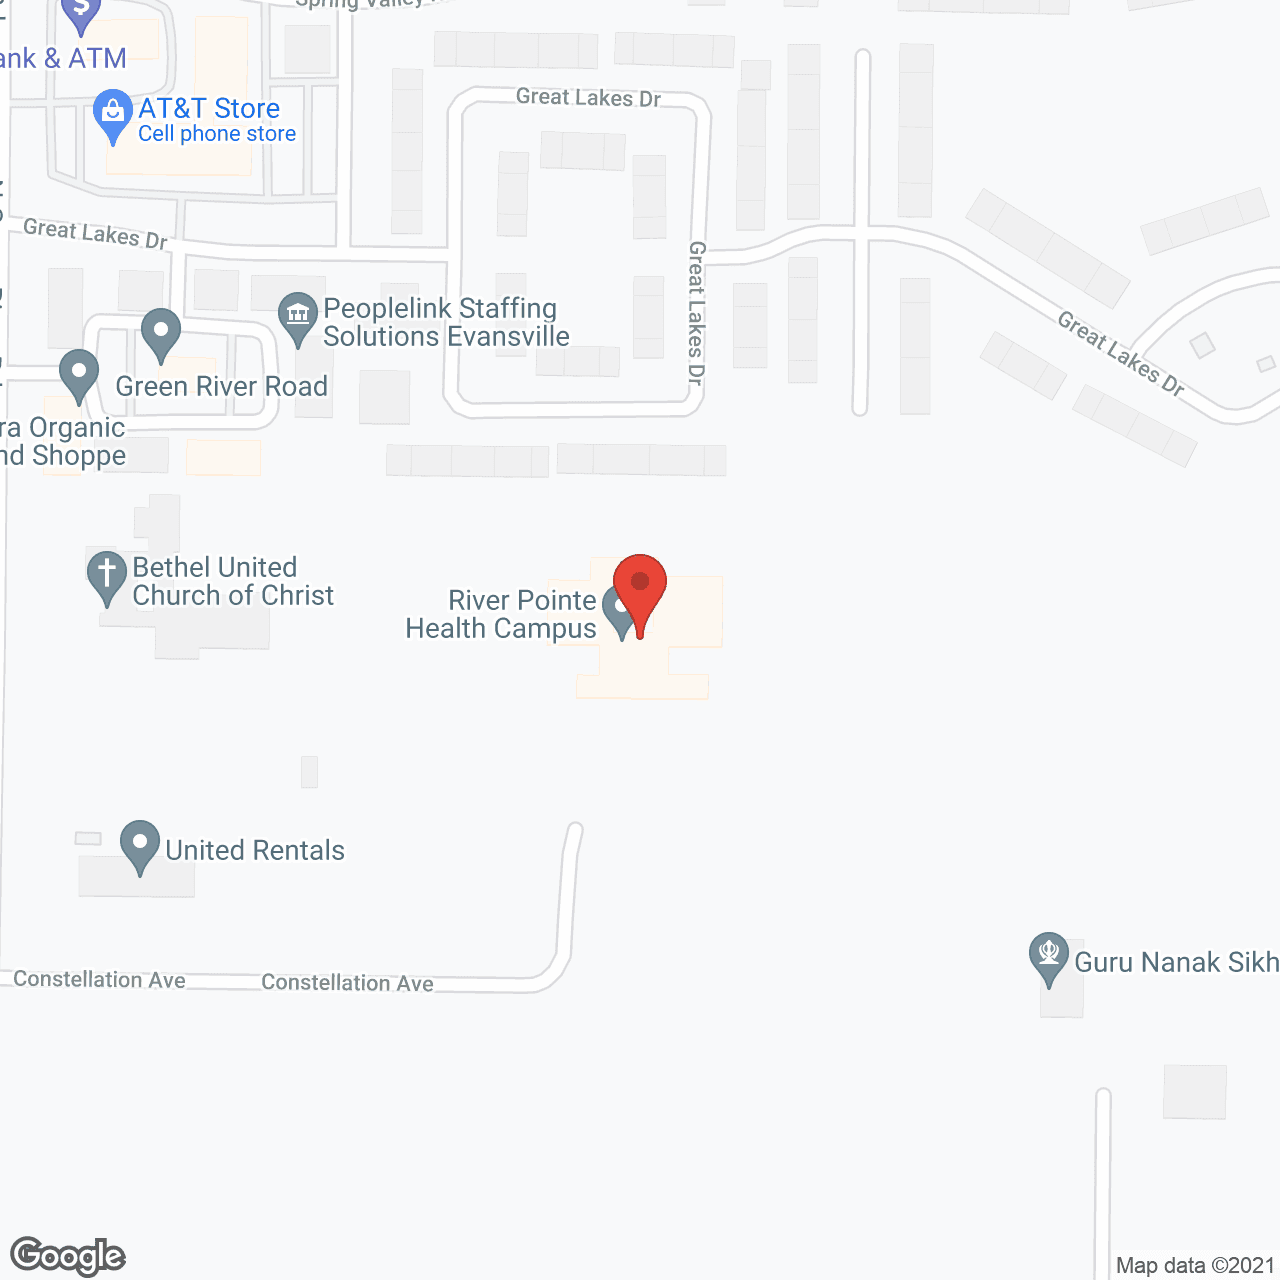 River Pointe Health Campus in google map